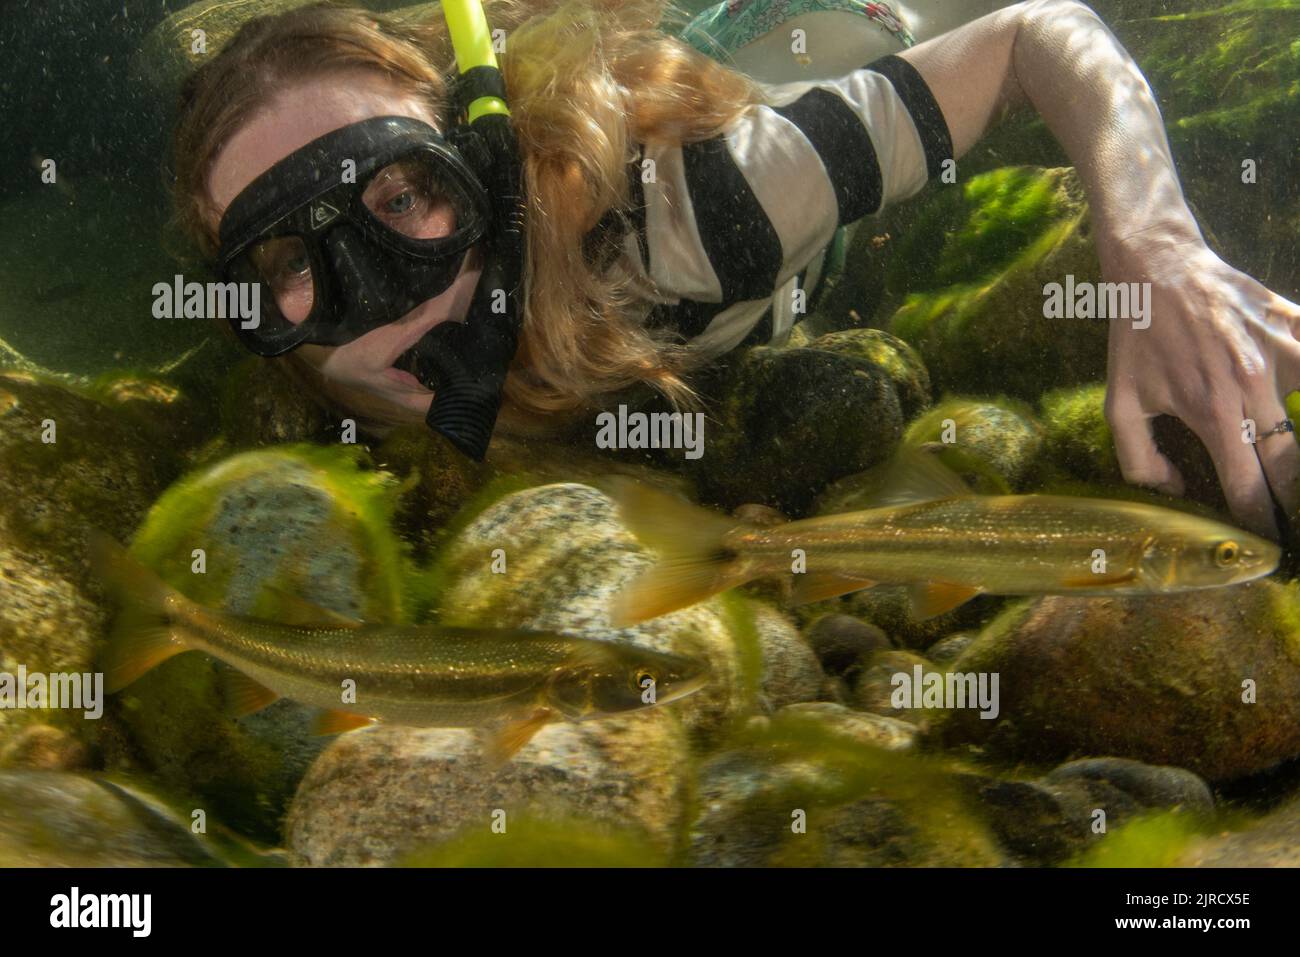 A female snorkeler in a river looking at fish, Sacramento pikeminnow (Ptychocheilus grandis), in a clean river in California, USA. Stock Photo